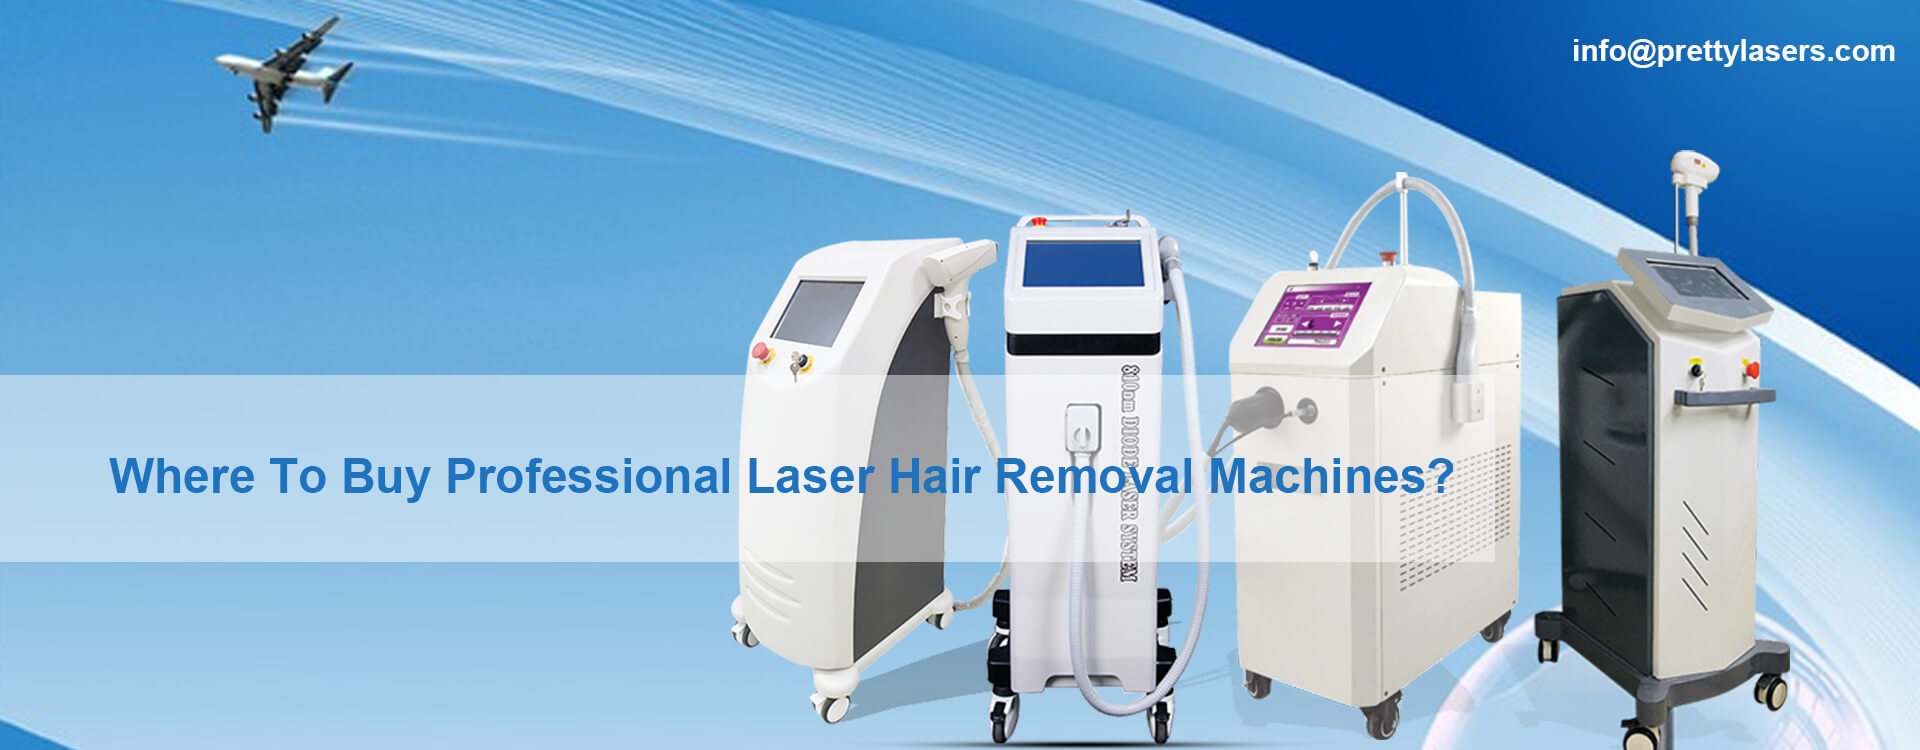 Where To Buy Professional Laser Hair Removal Machines?